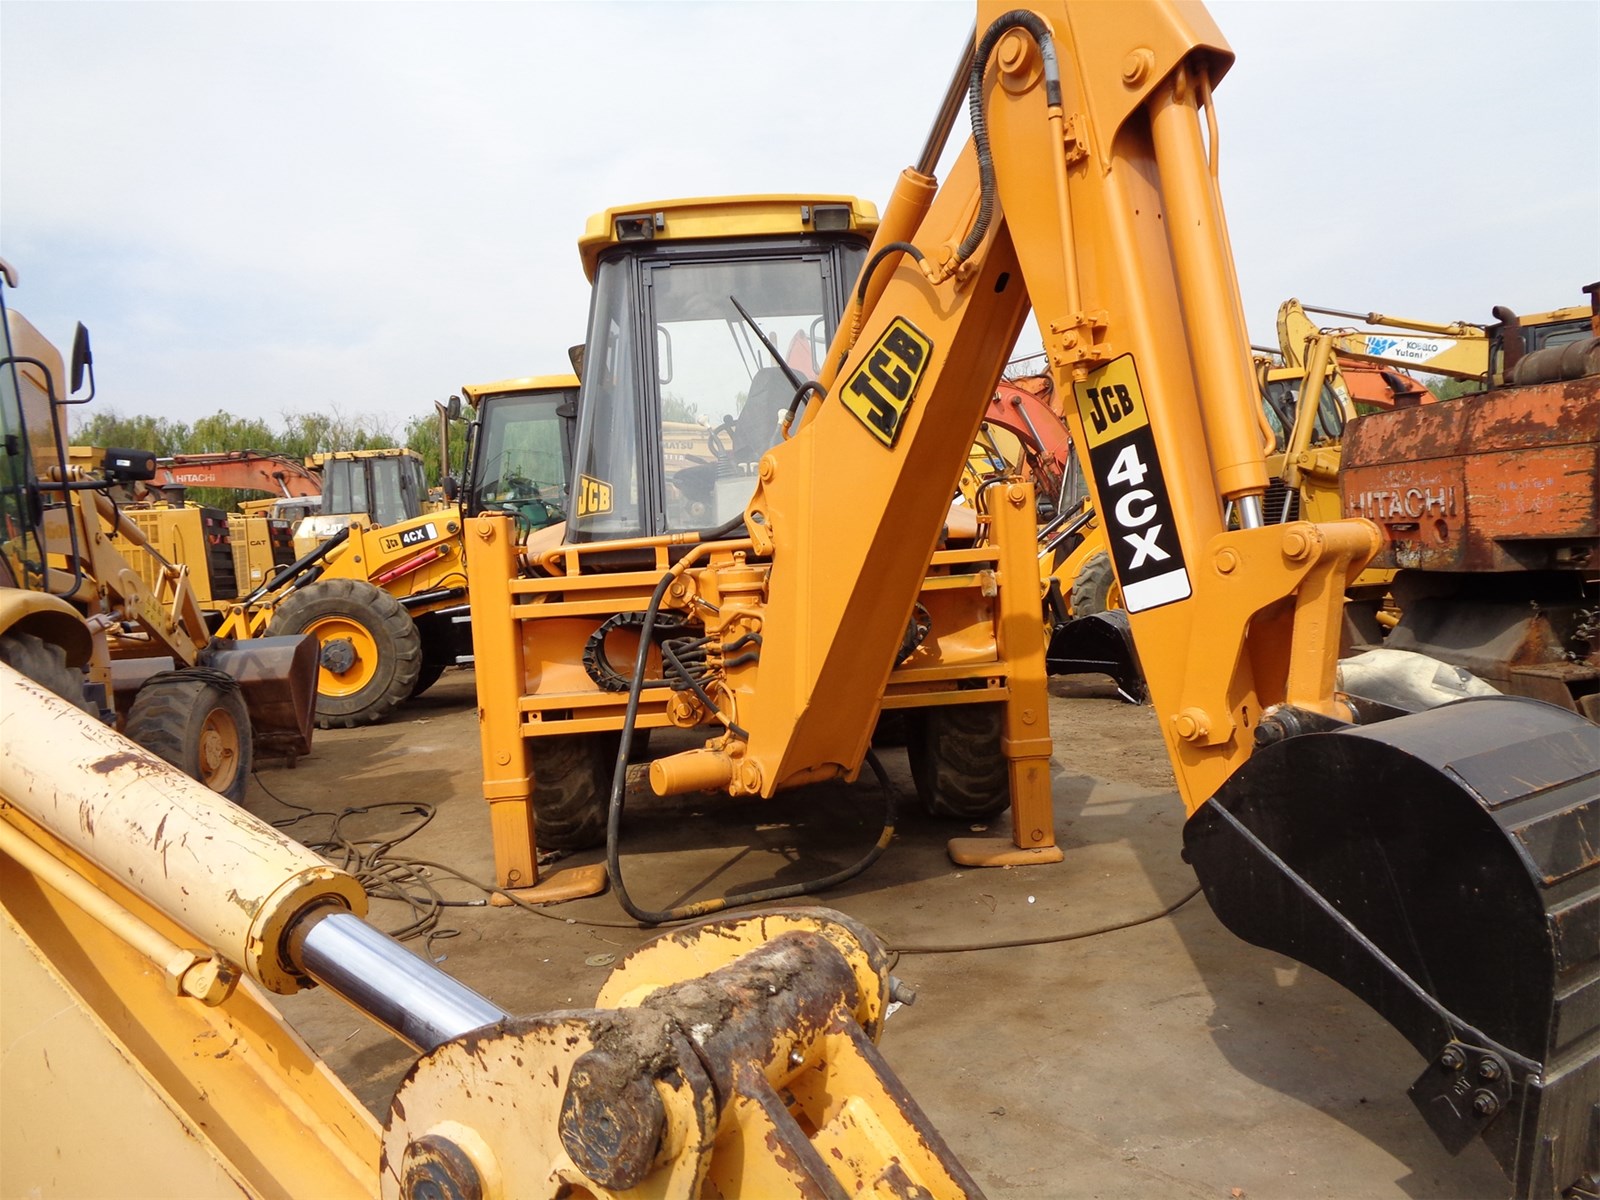 Lower Working Hours Used Original Jcb 3cx 4cx Backhoe Loader for Sale with Good Condition